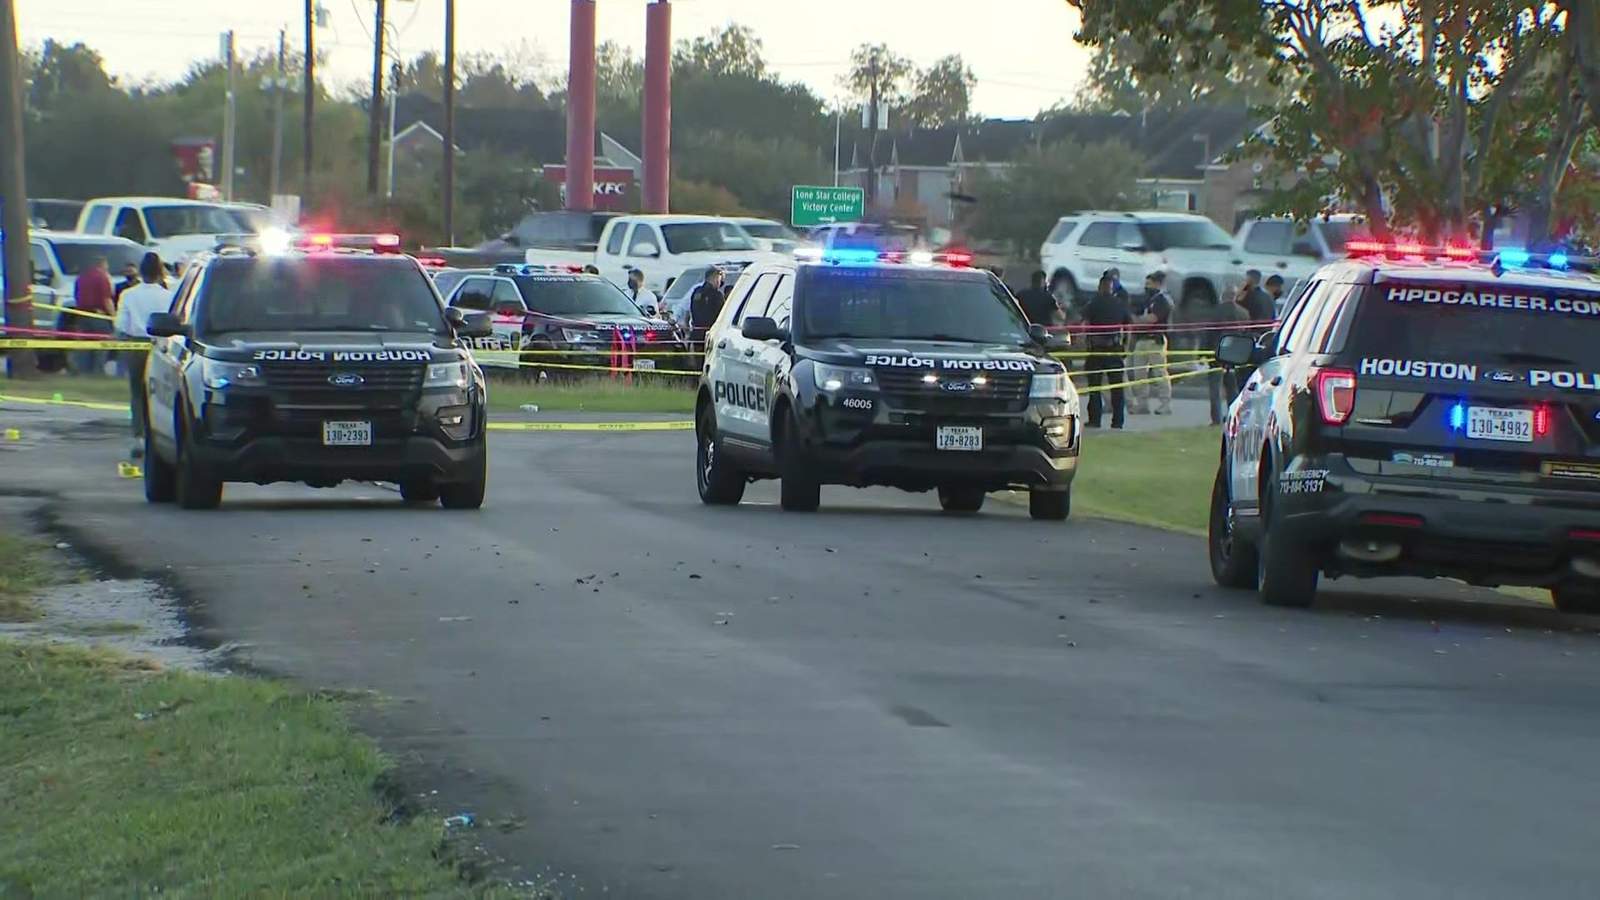 Houston police sergeant killed during shootout along North Freeway, chief says